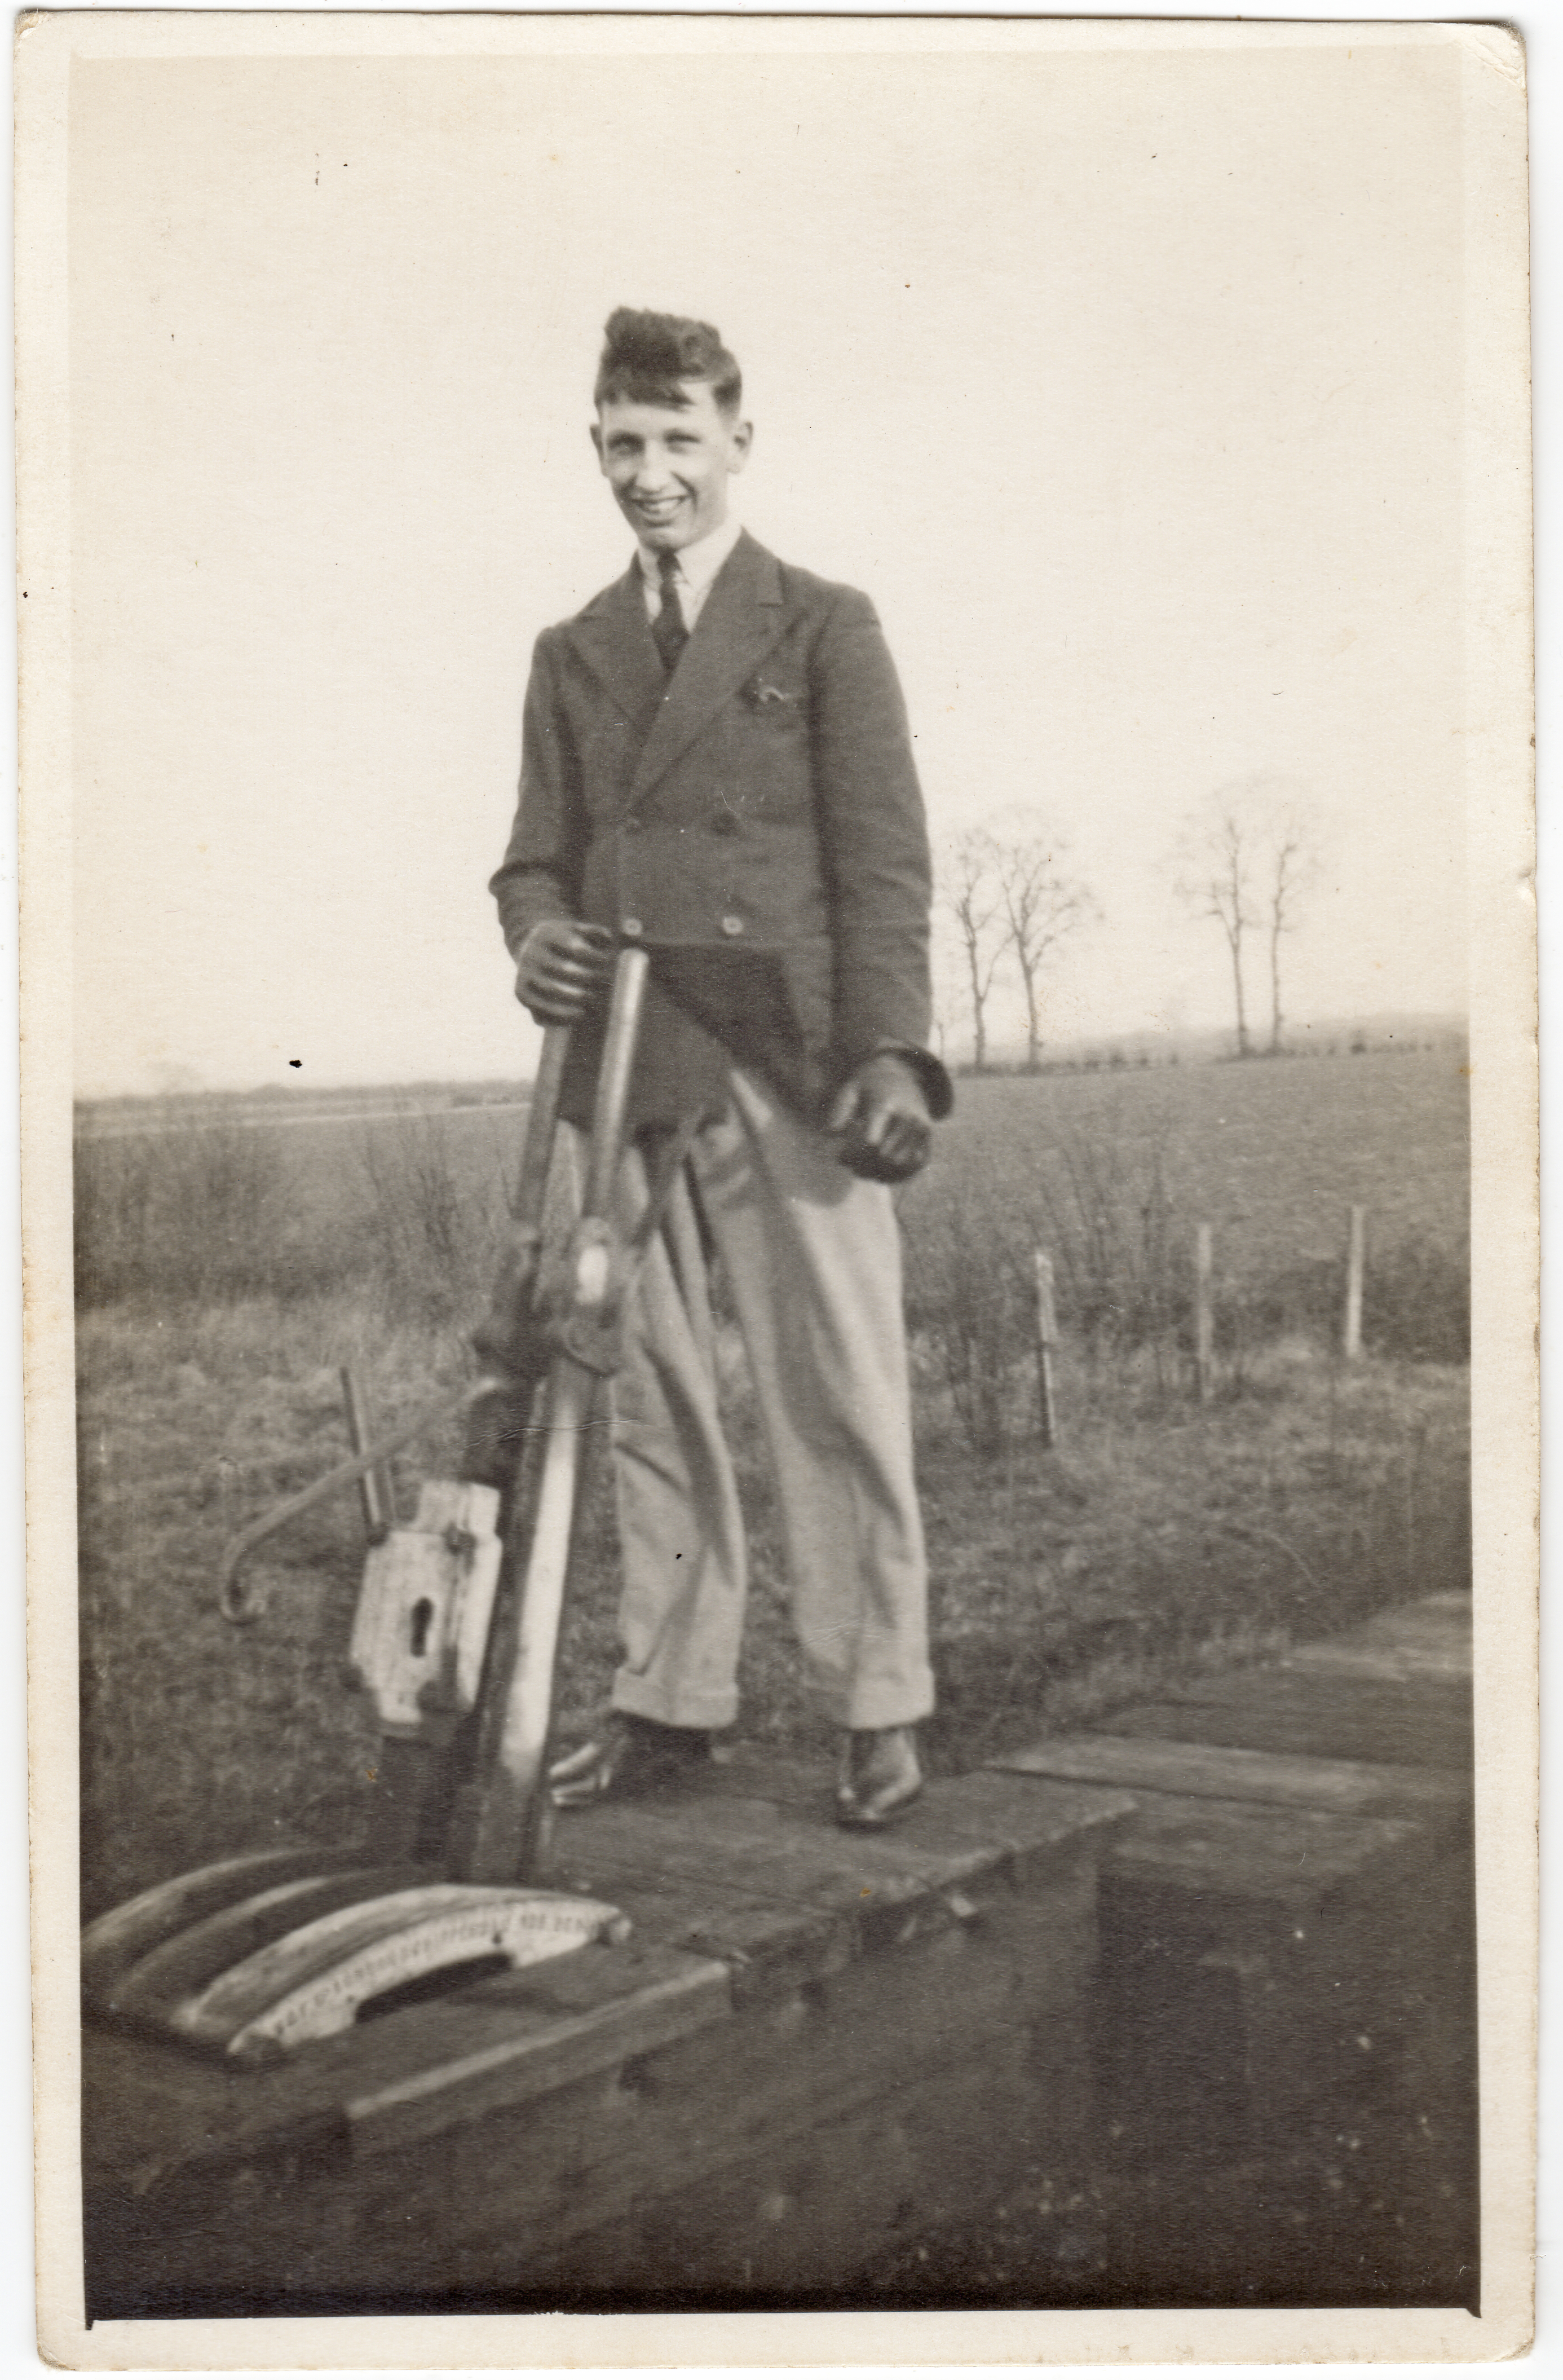 129. ID OJR_273 Edgar Reynolds working on the railway ? Photograph donated by Pat Milgate
Cat1 Places-->Peldon-->People